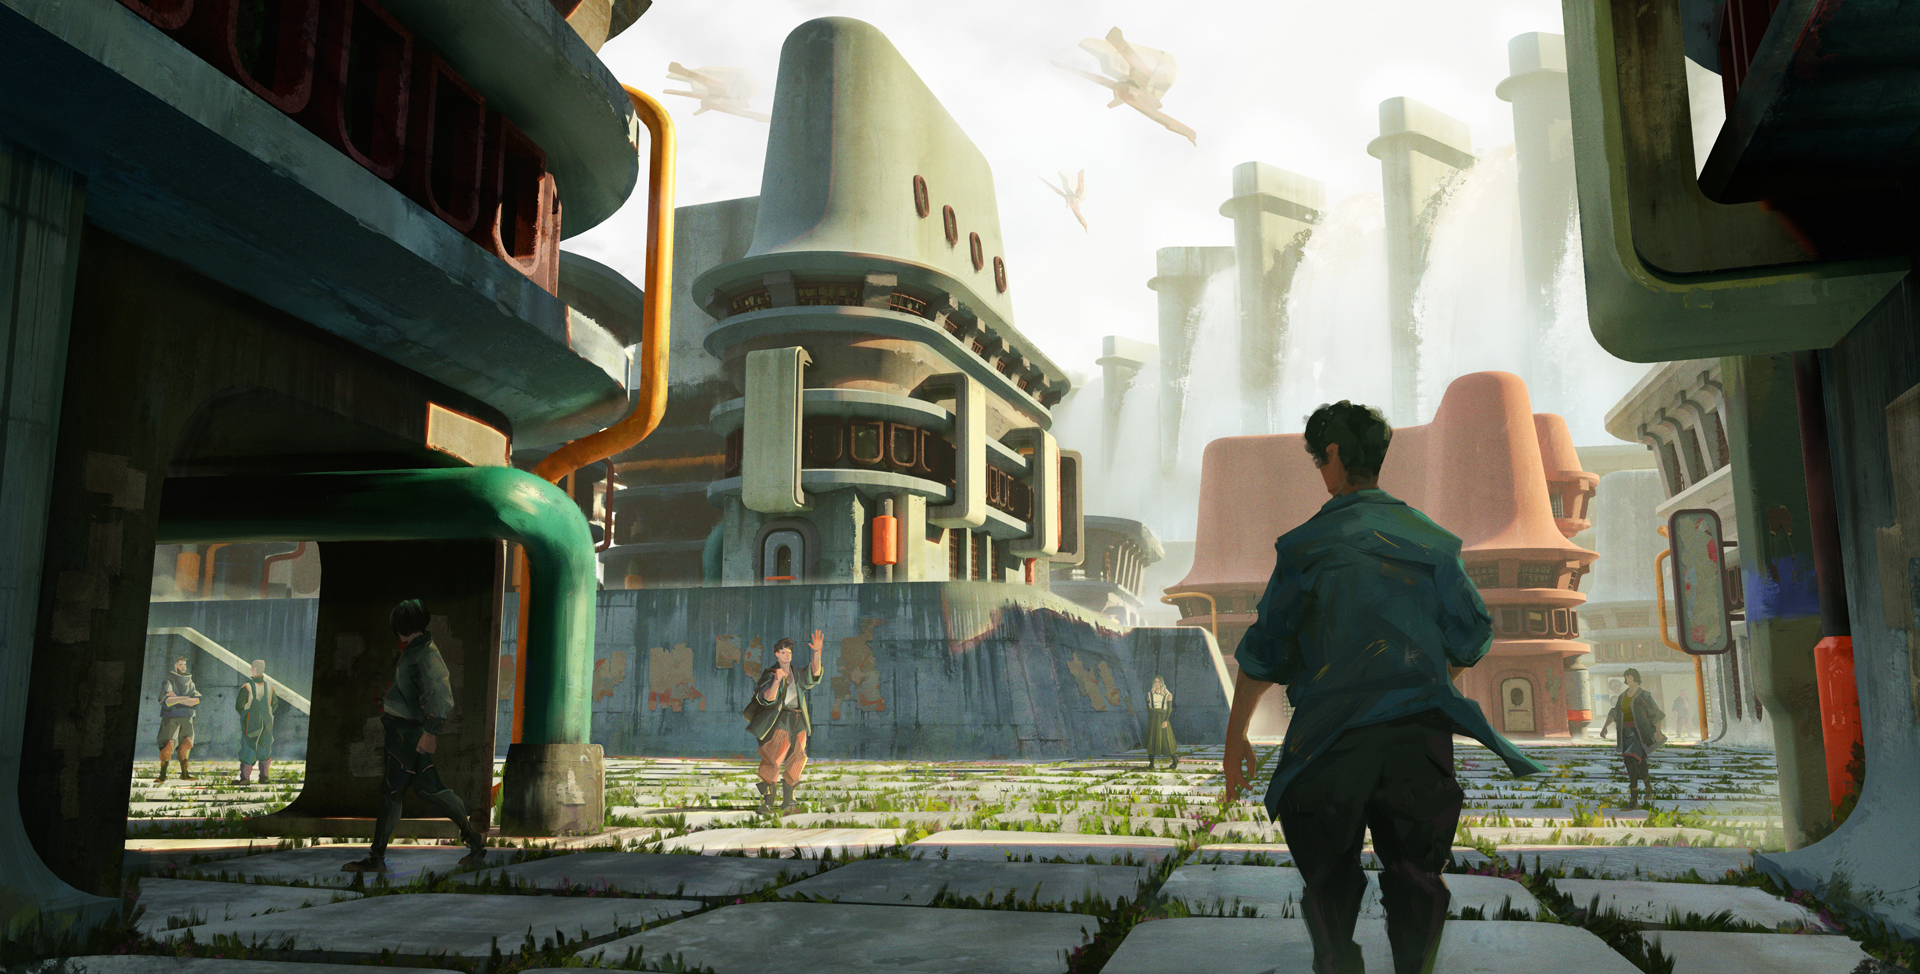 BA Games Art & Design work by Jake Miller. A keyframe showing a street scene of Unda City as airships fly overhead.